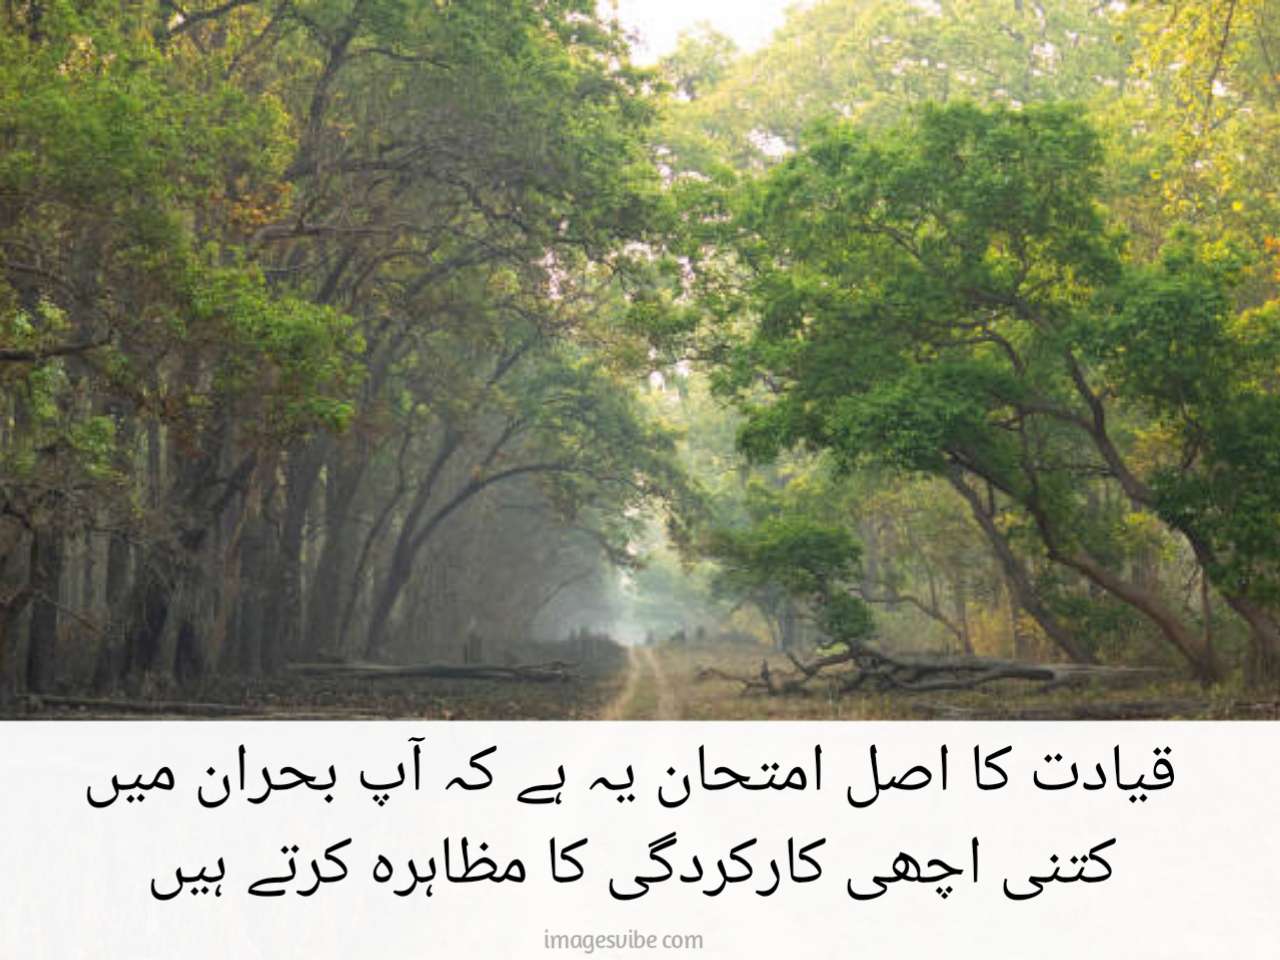 Motivational Urdu Images With Quotes30 